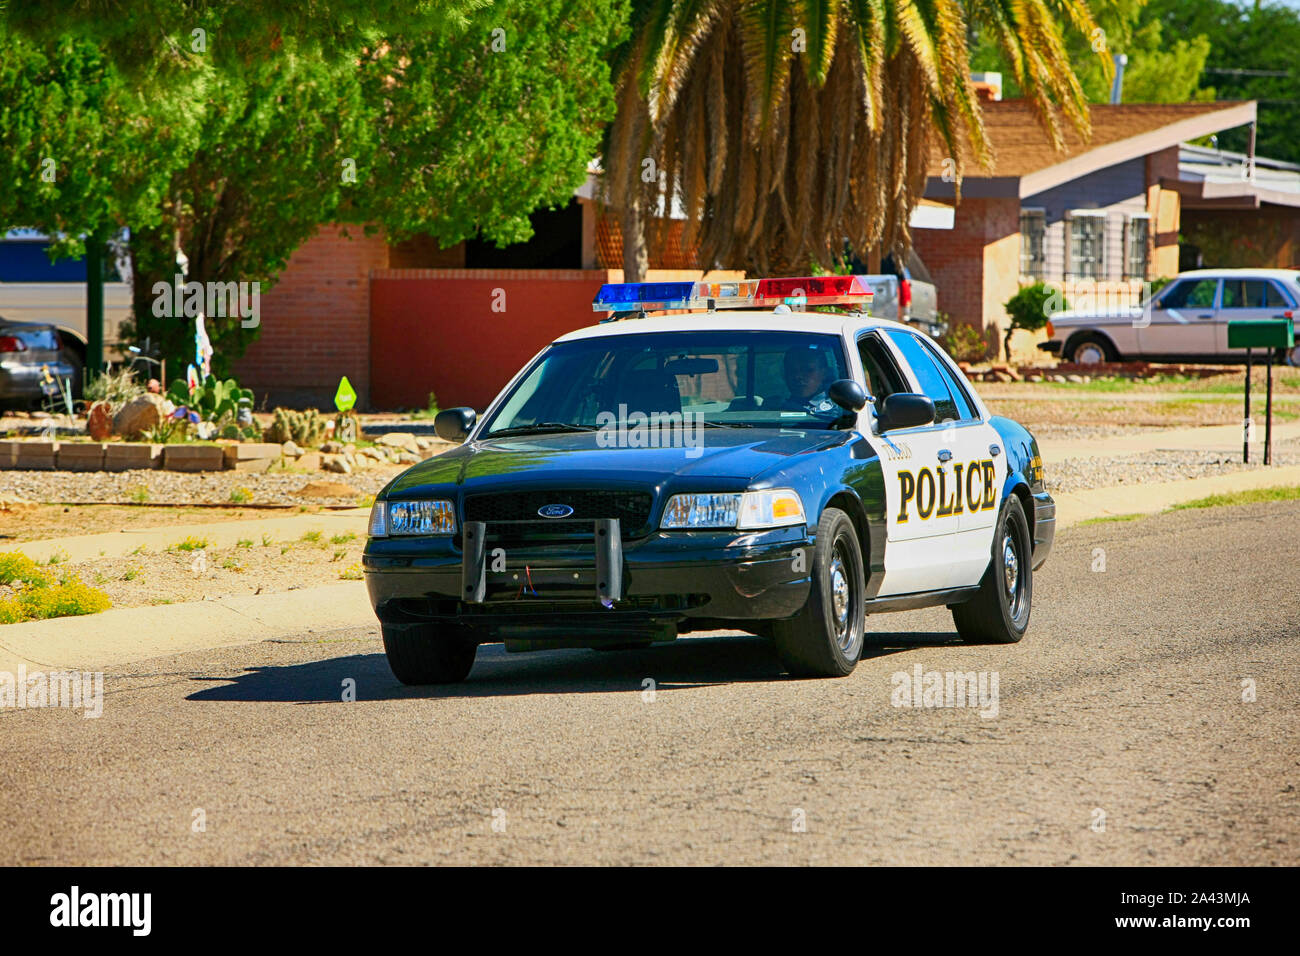 Tucson Police Department cruiser in a housing suburb of this Arizona city Stock Photo